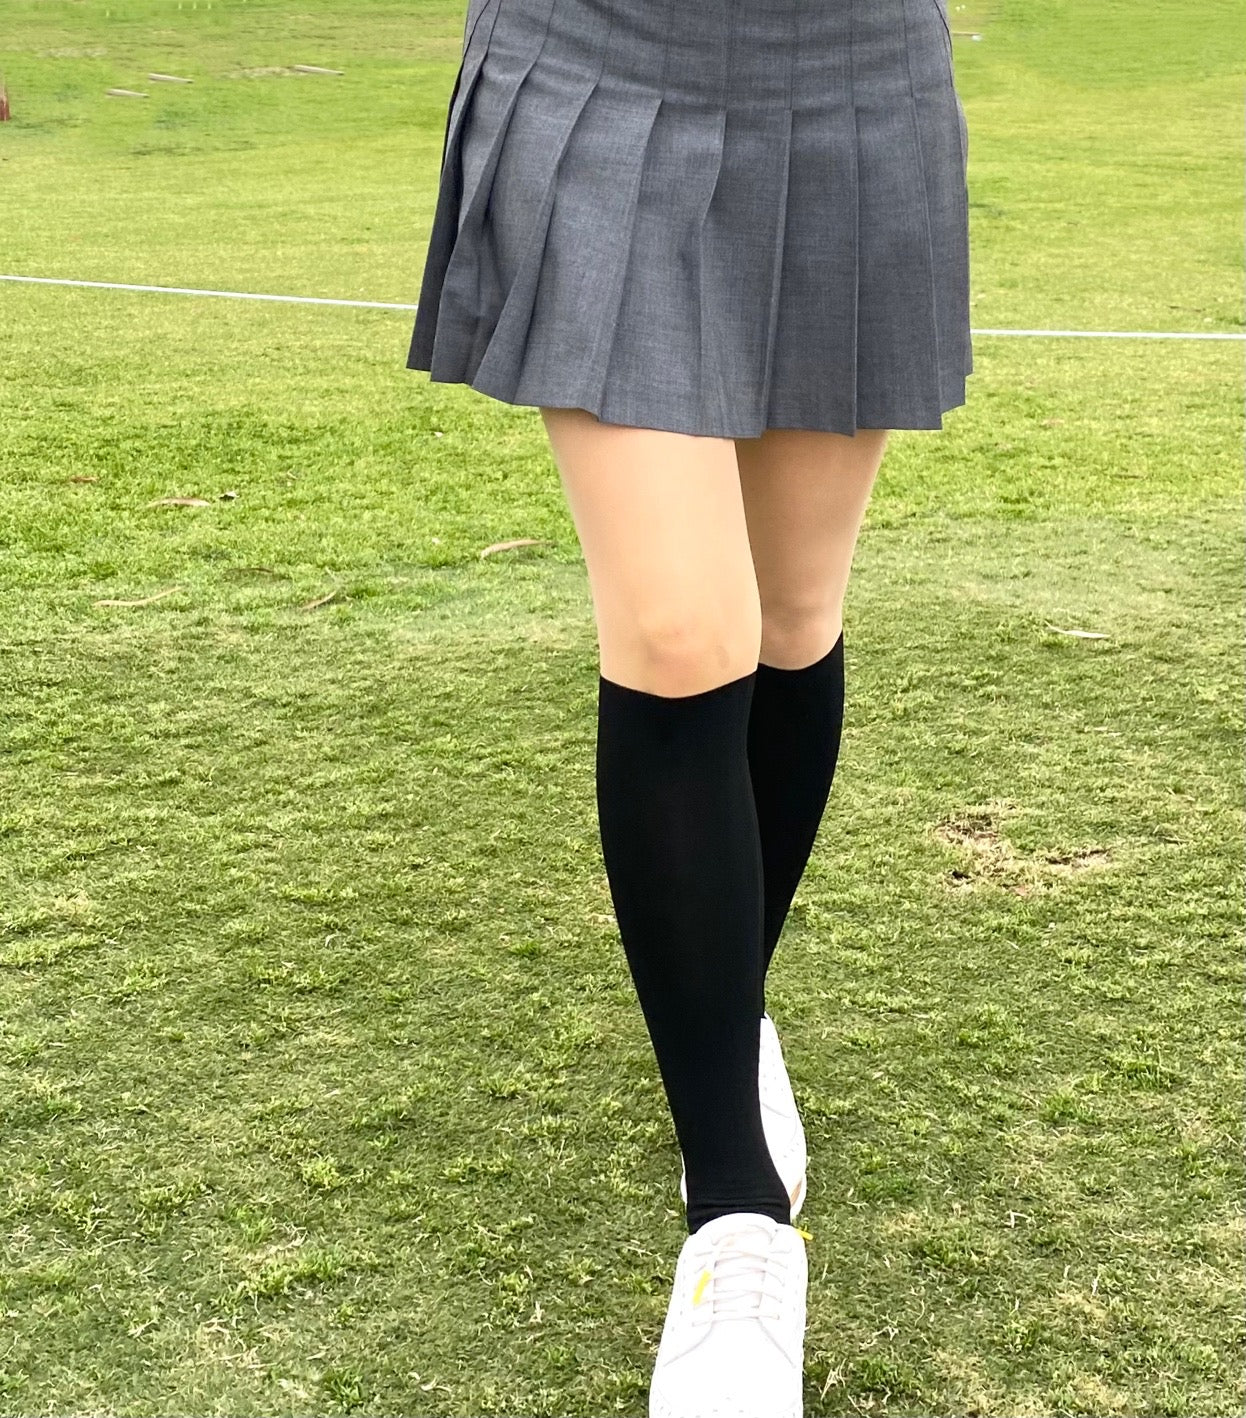 [Gamsung]Two Tone Knee-High Stocking